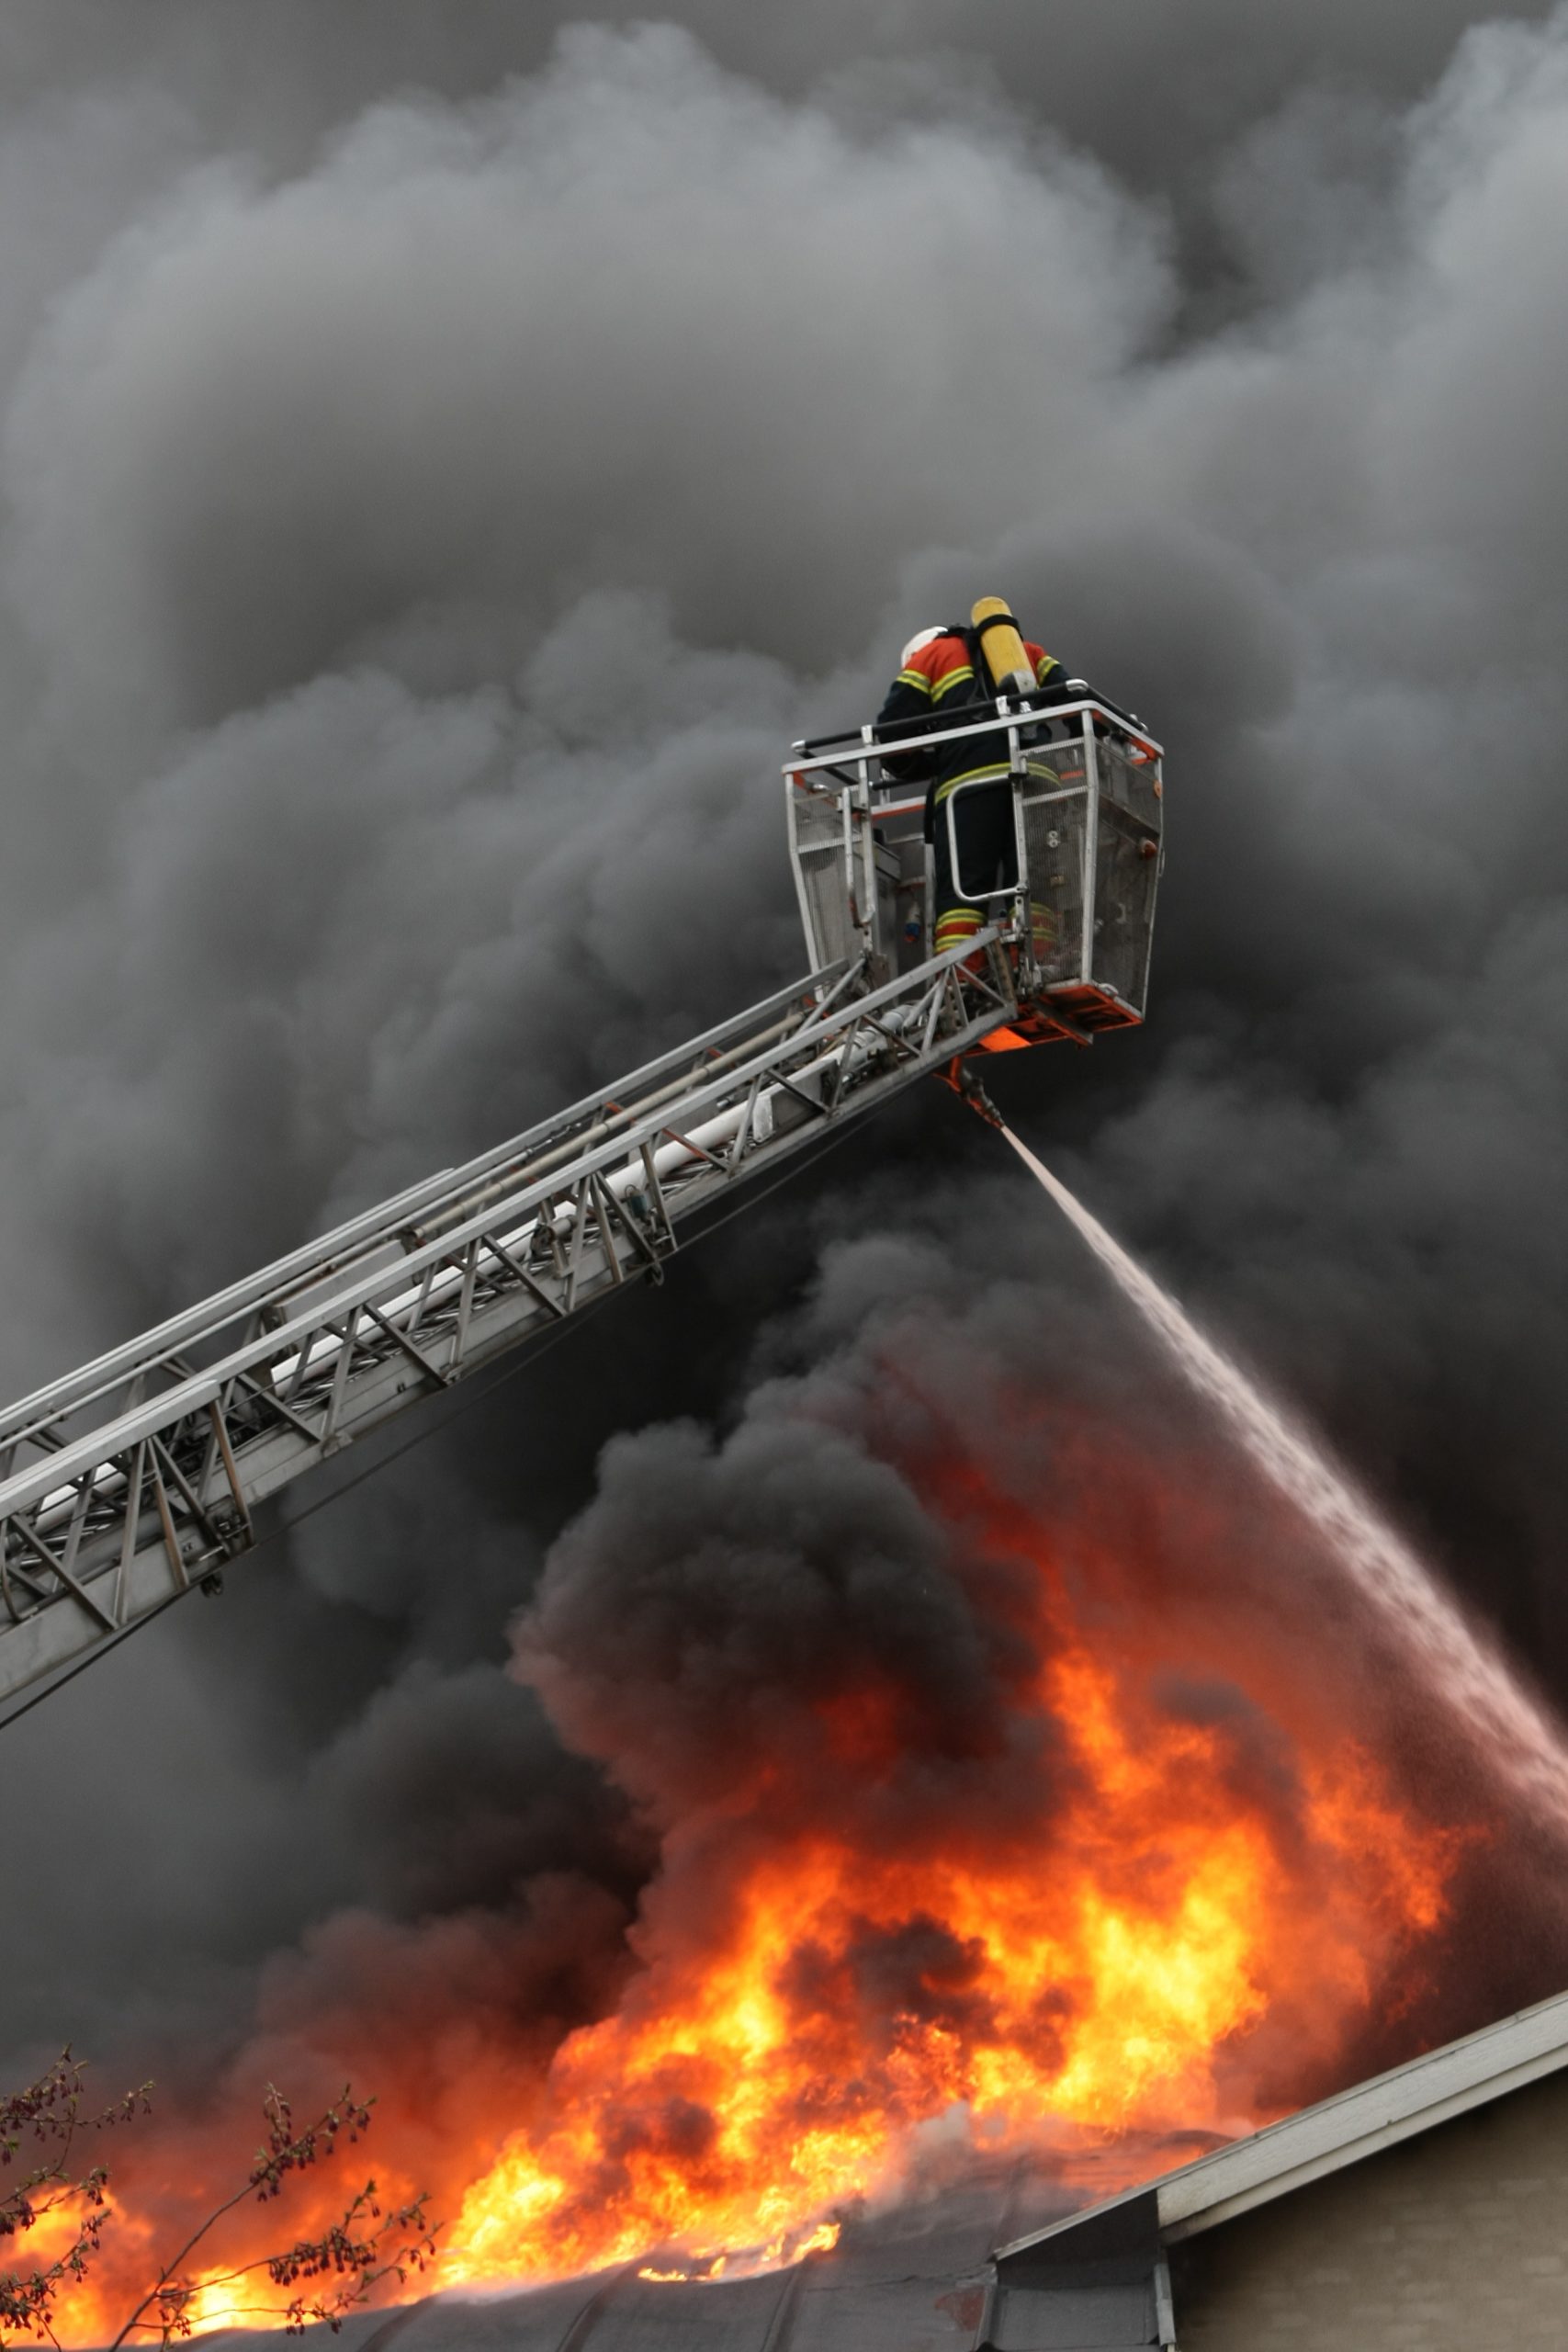 A firefighter on a lift prays water down on a burning roof.